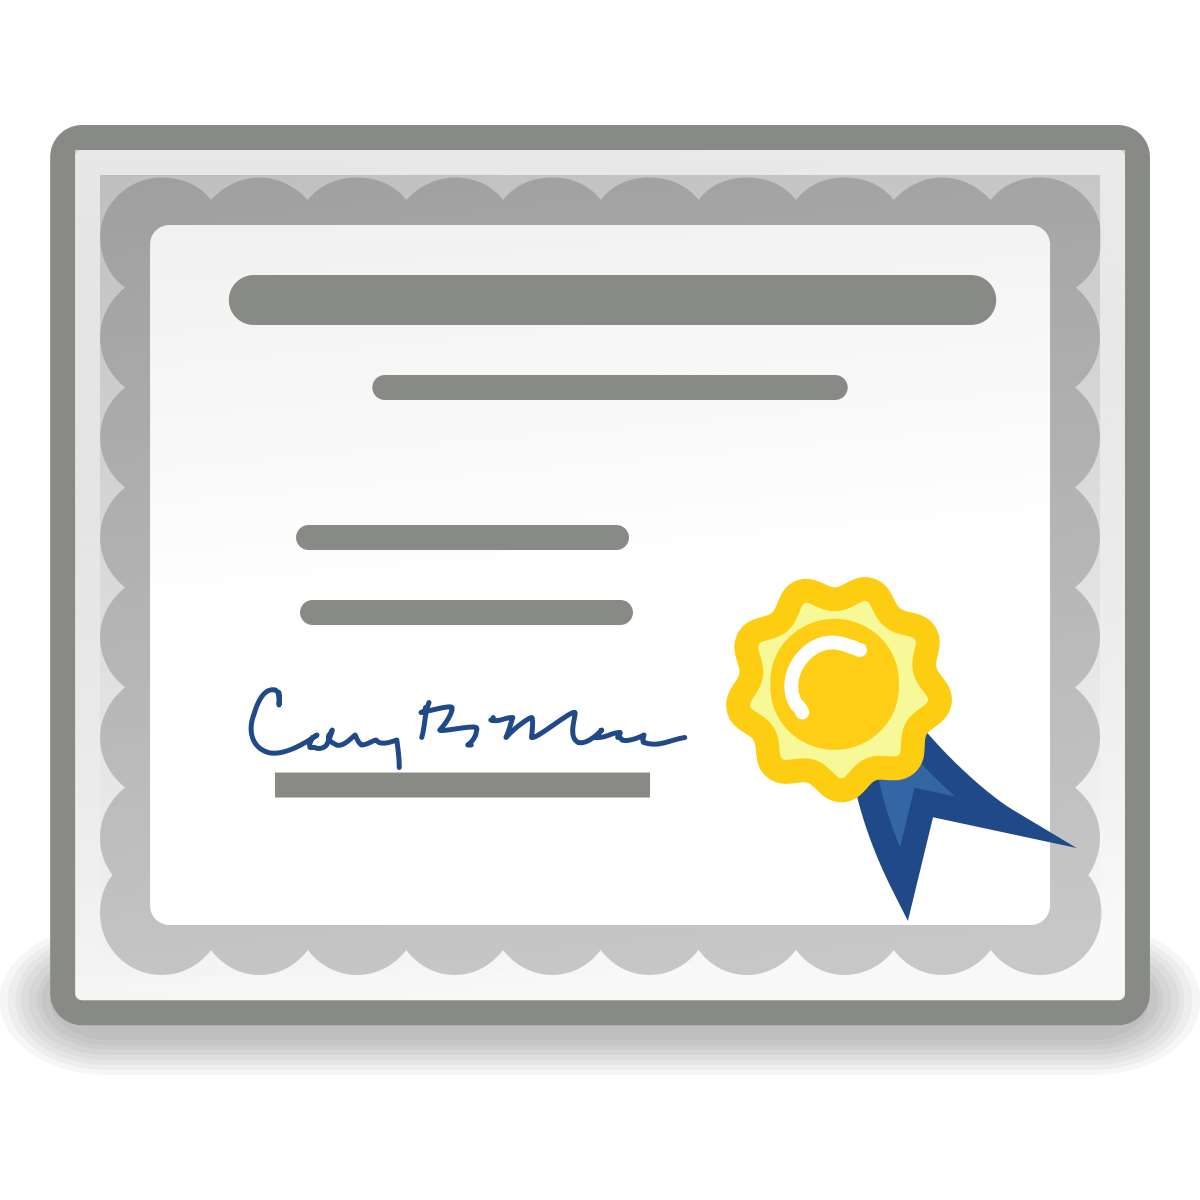 Appreciation Certificate PNG Image Background